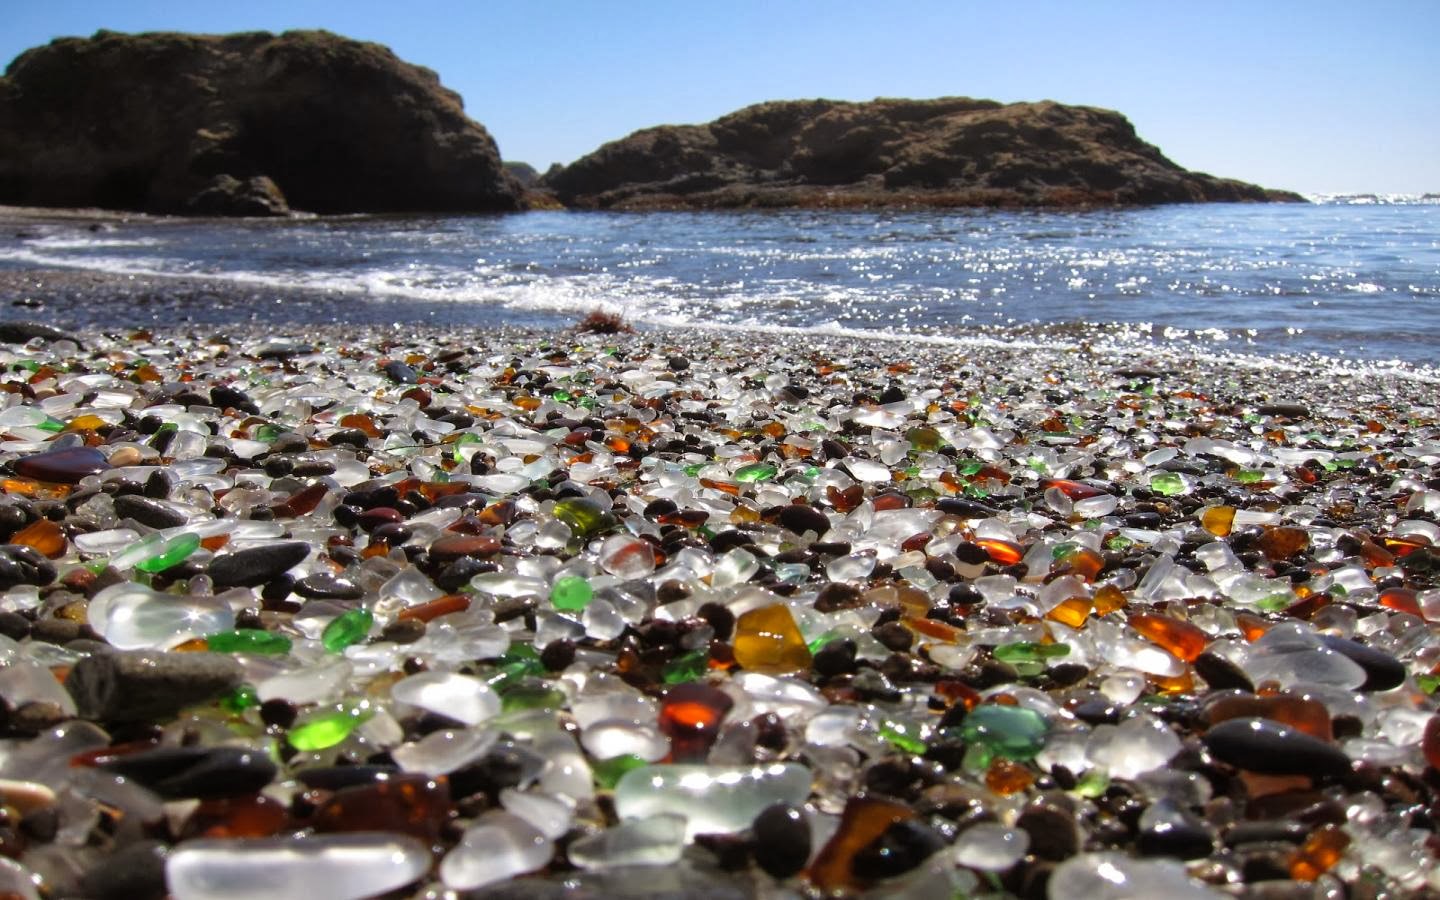 10 Best Sea Glass Beaches In The World